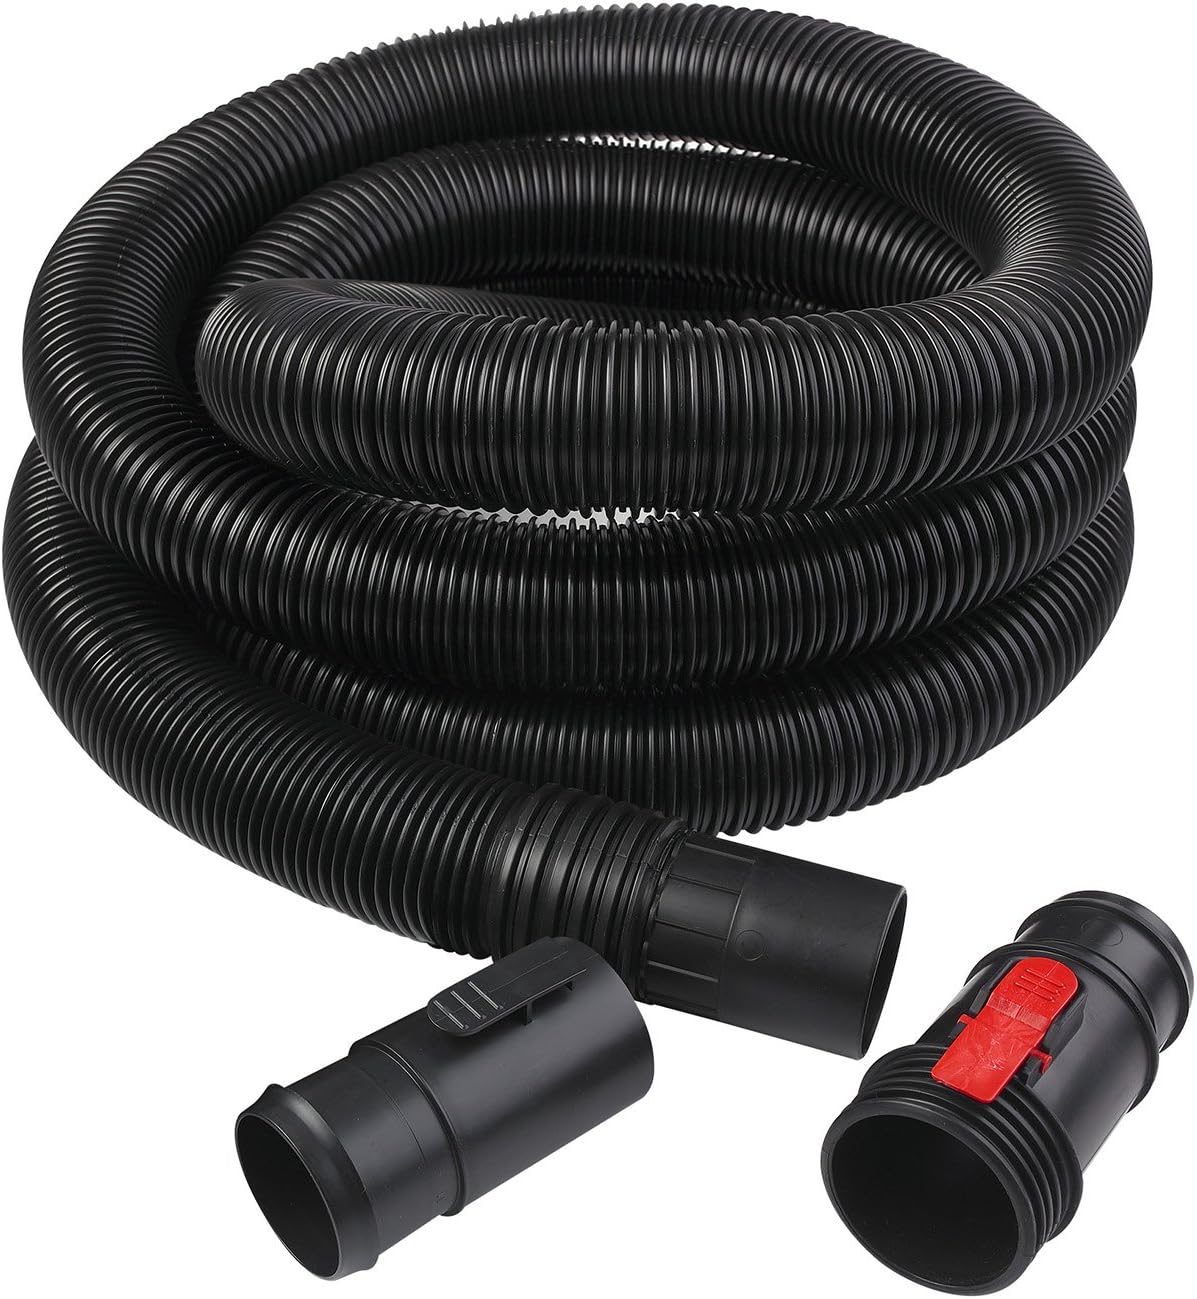 Emerson Tool Company WORKSHOP Wet/Dry Vacs Vacuum Accessories WS25021A 13-Foot Wet/Dry Vacuum Hose, Extra Long 2-1/2-Inch x 13-Feet Locking Wet/Dry